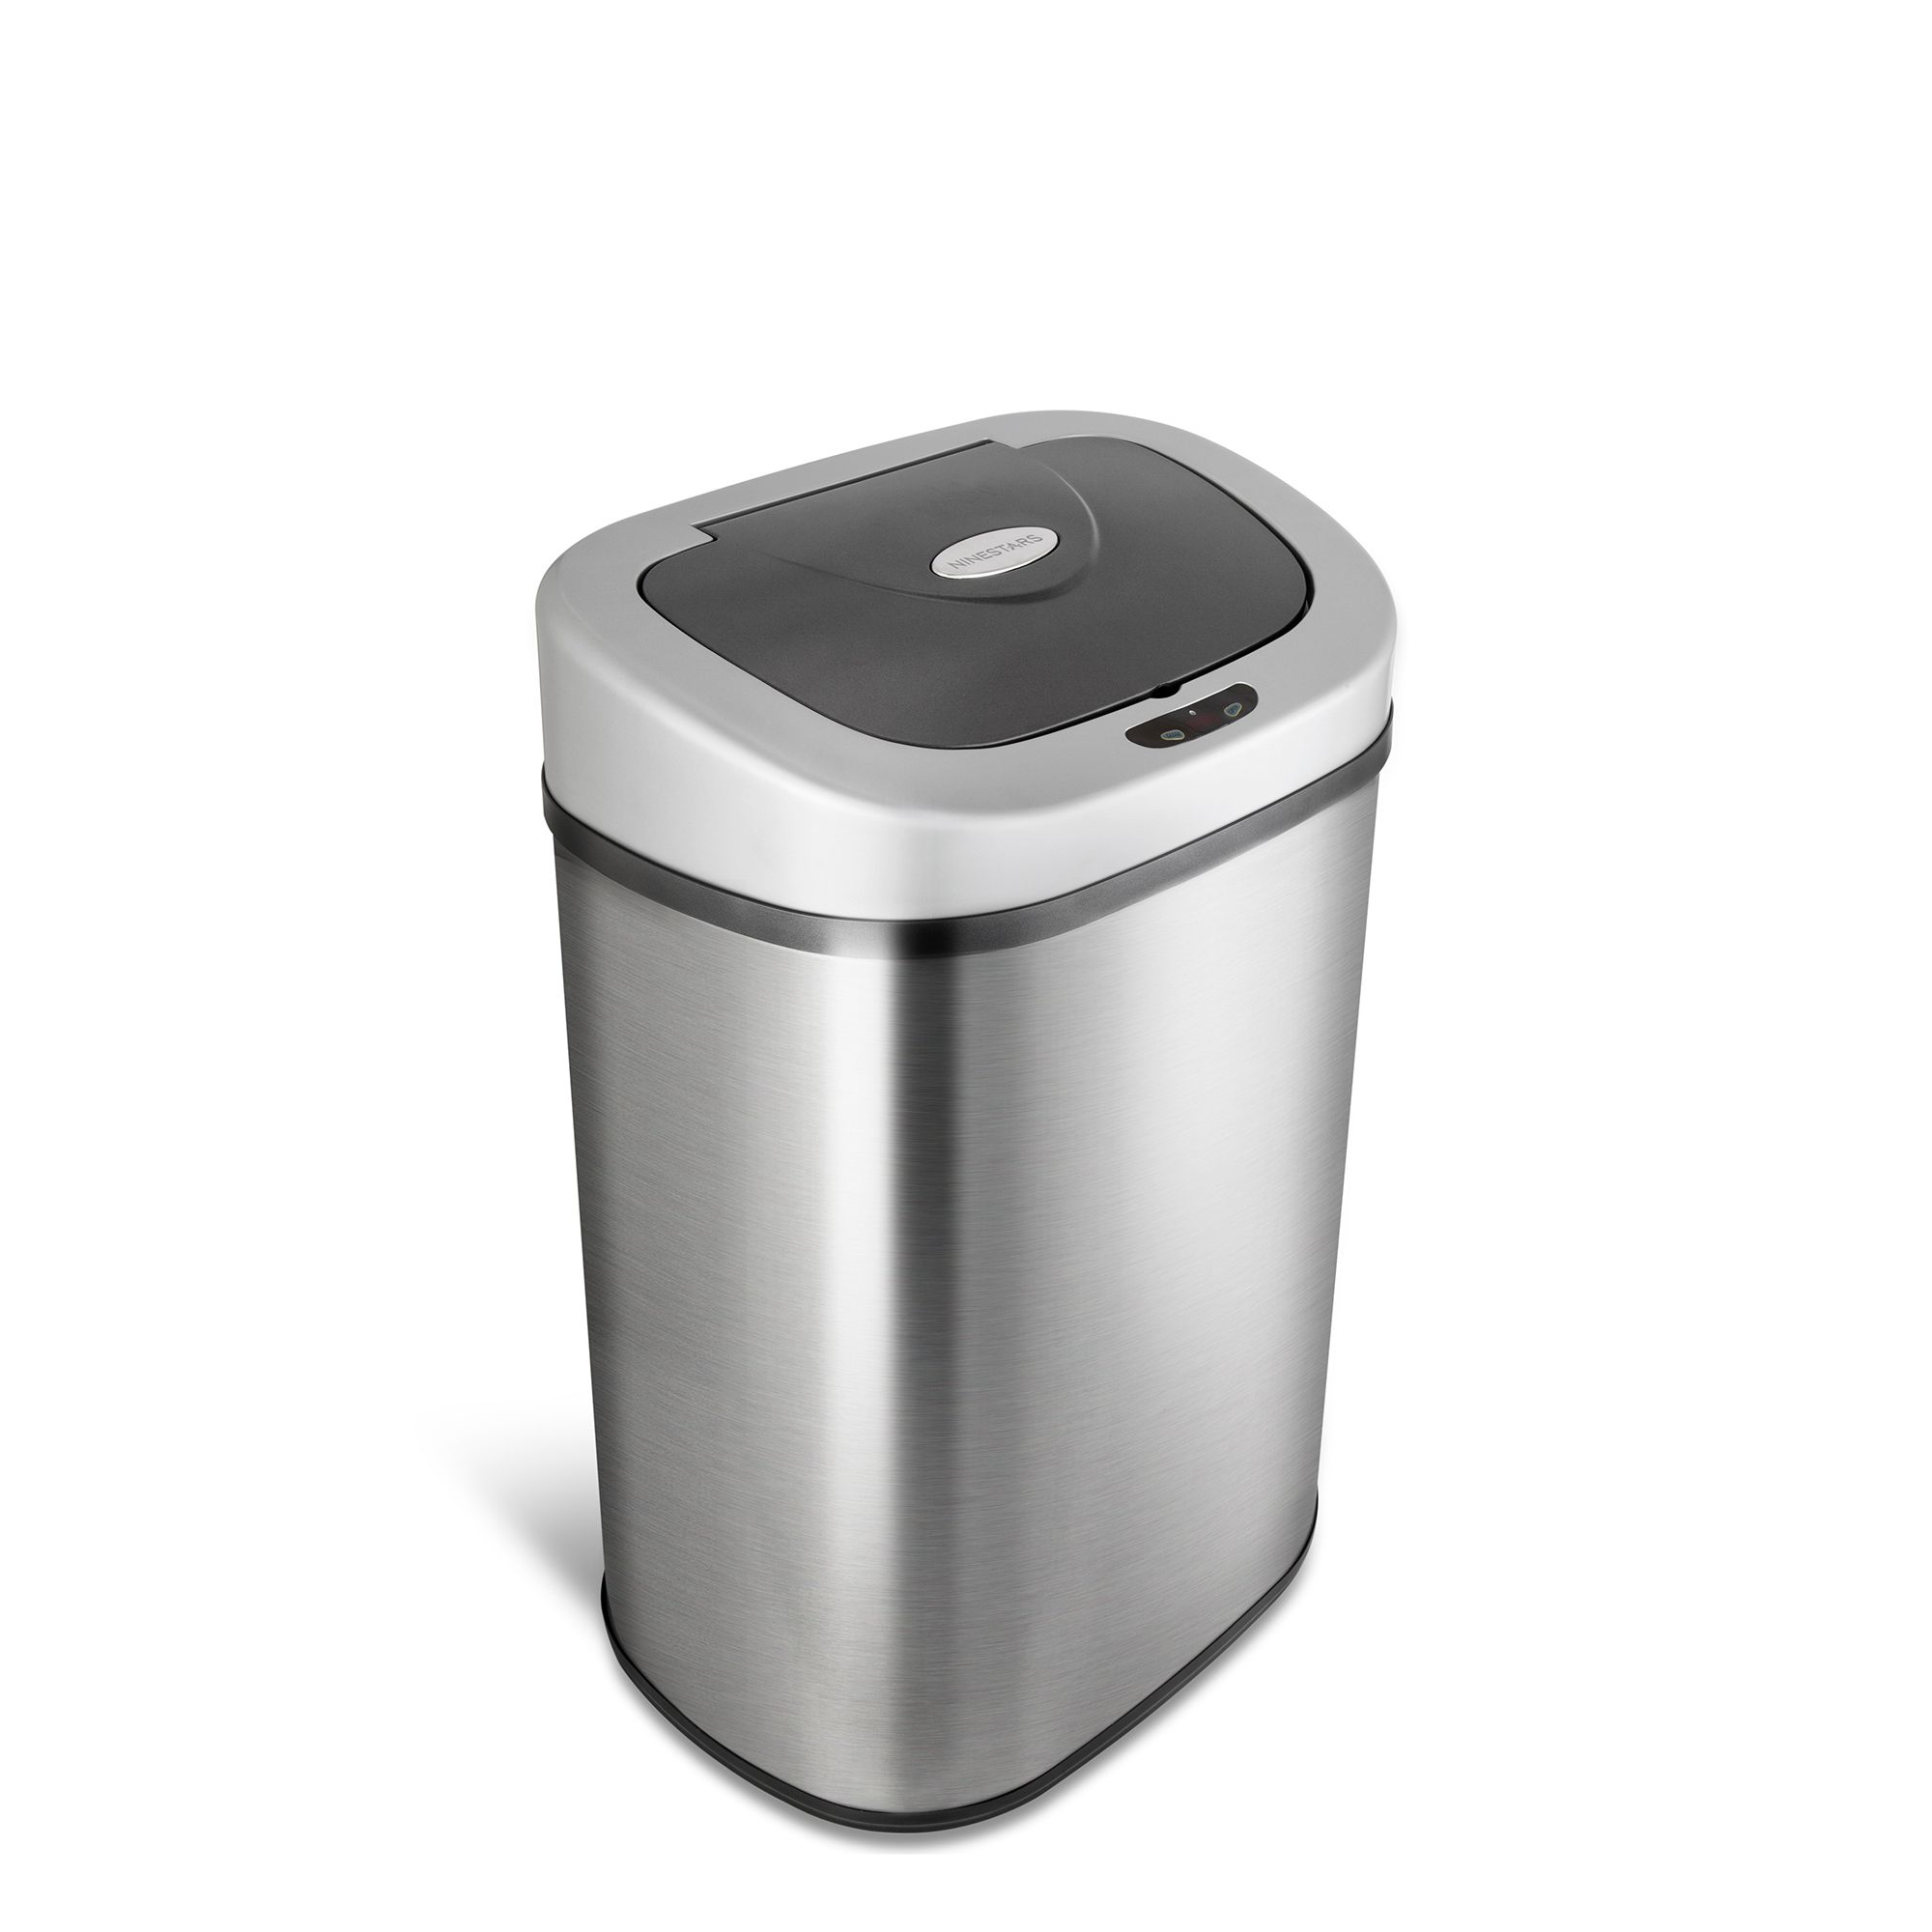 13 Gallon Touch Free Automatic Trash Can High Capacity Plastic Garbage Can Trash Bin with Lid for Kitchen Living Room Office Bathroom, 50L